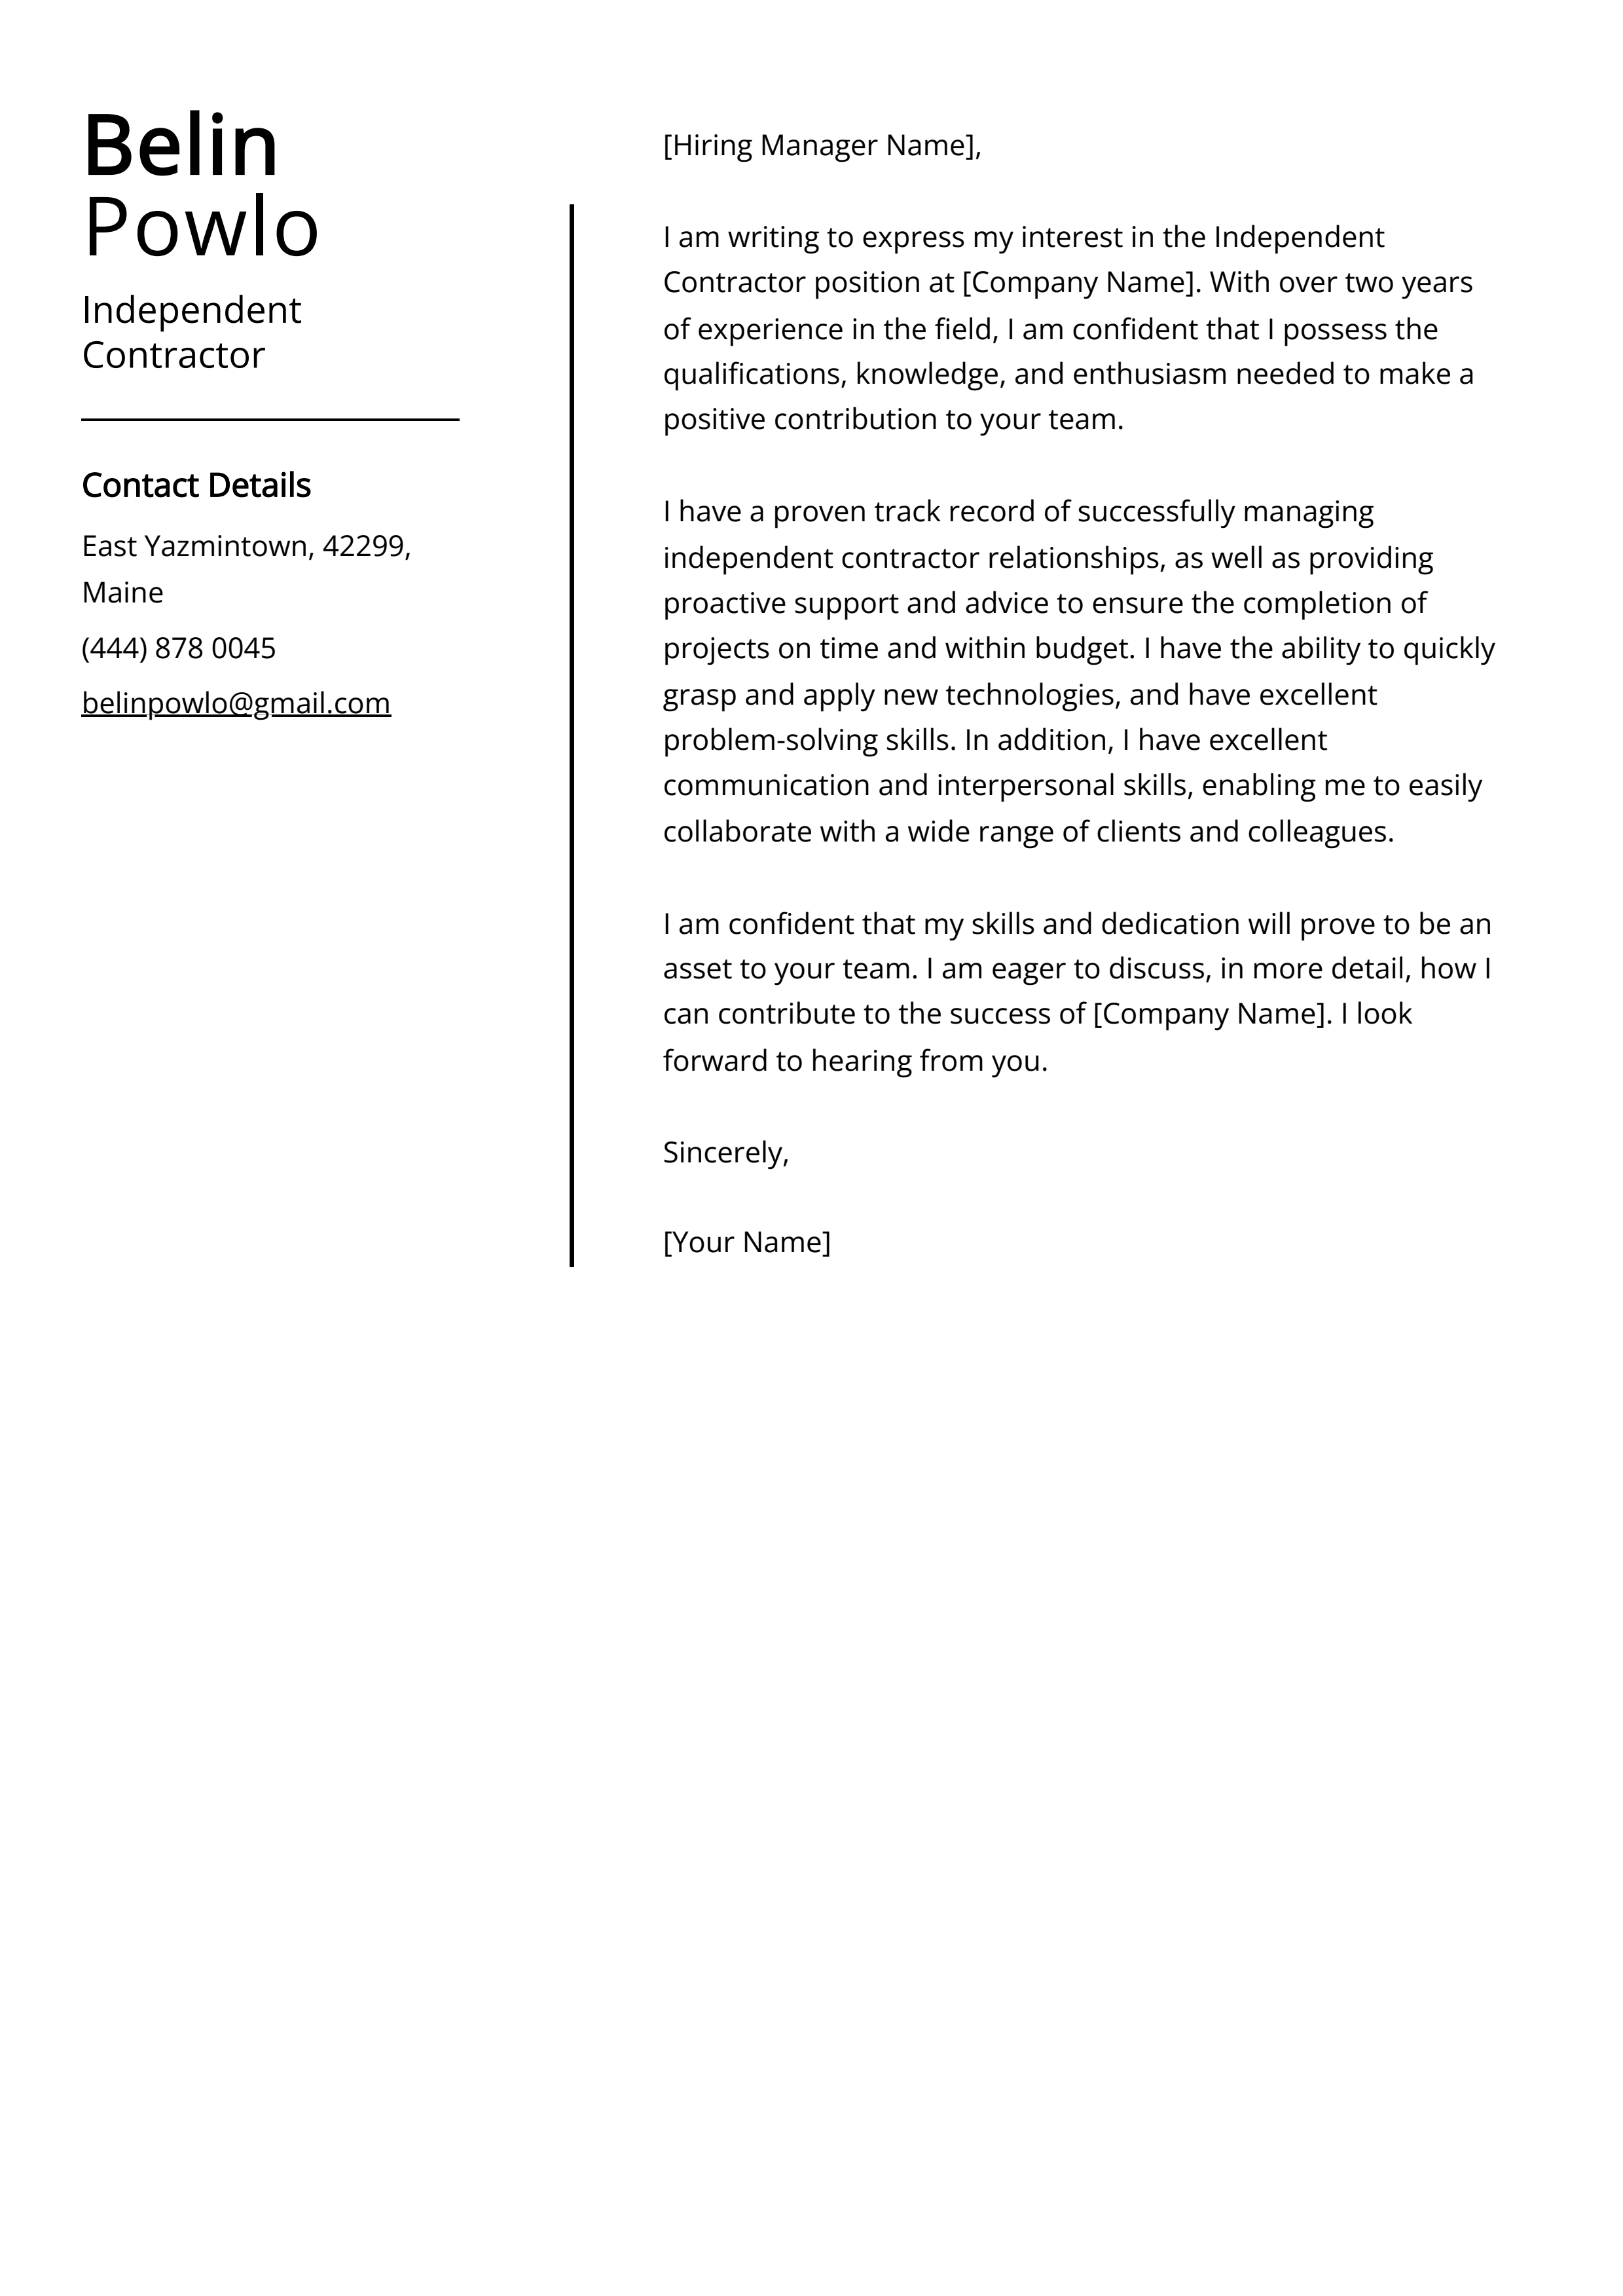 Independent Contractor Cover Letter Example